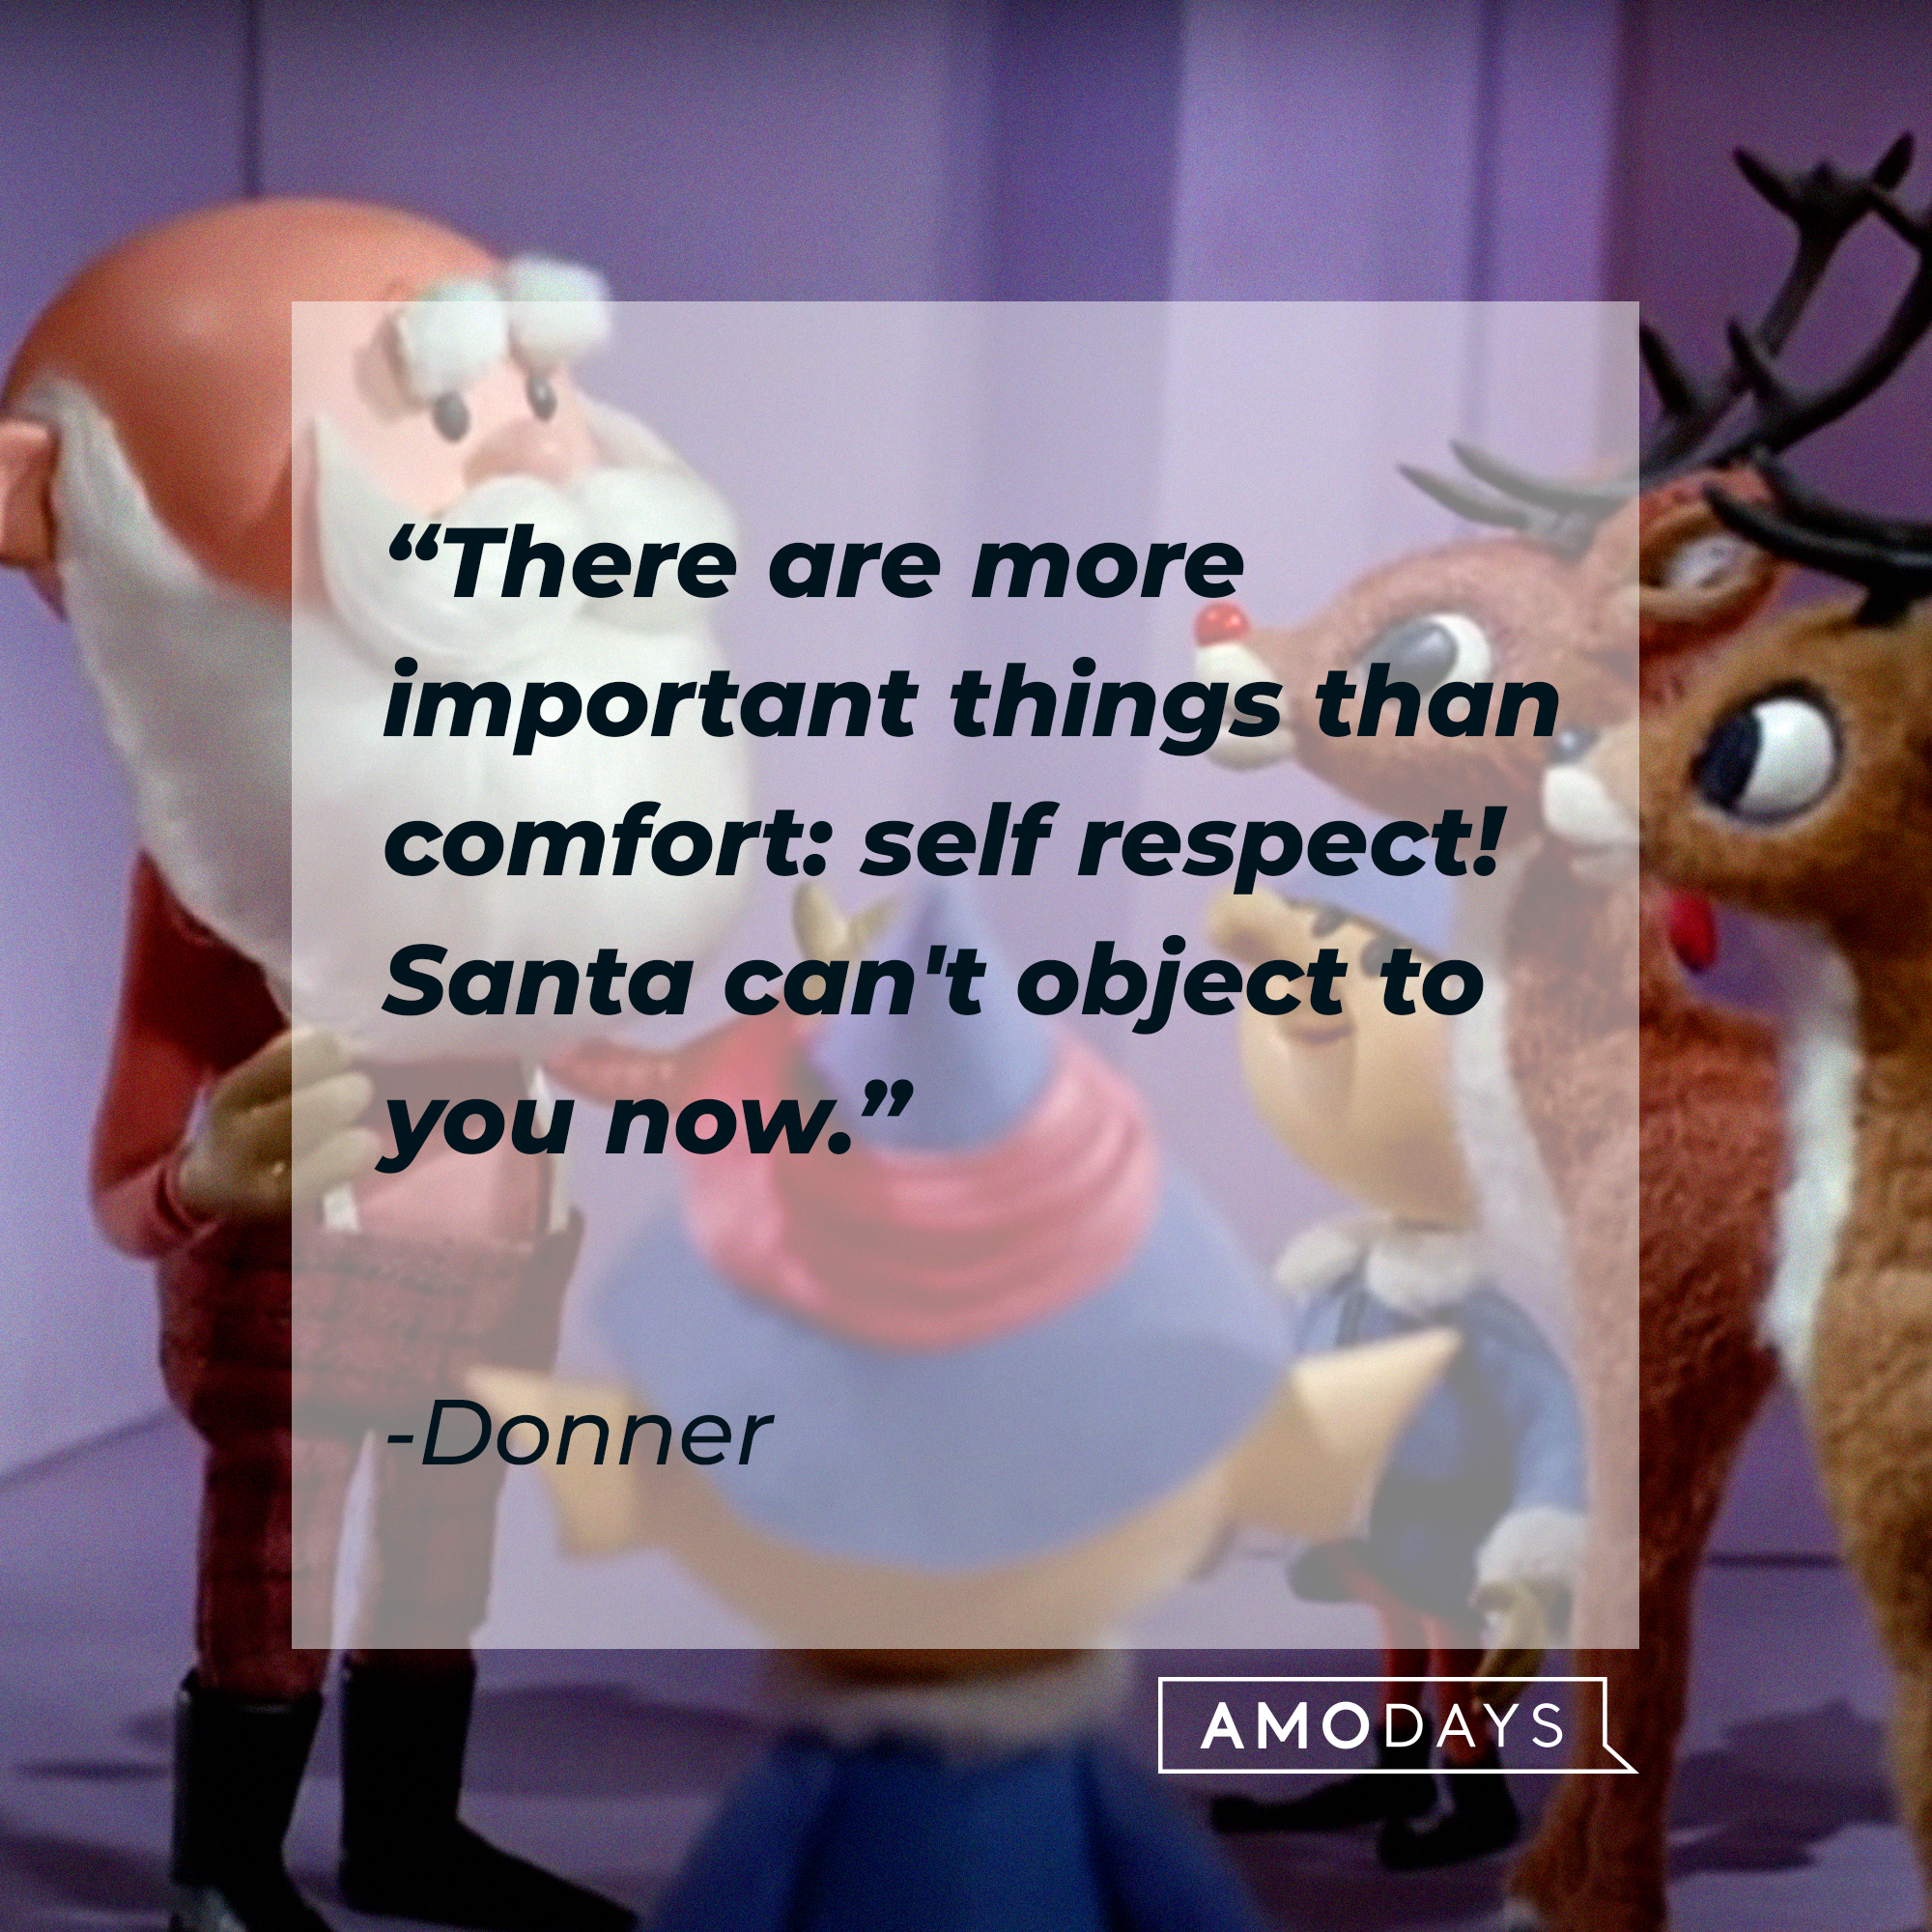 Donner's quote: “There are more important things than comfort: self respect! Santa can't object to you now." | Source: facebook.com/Rudolph the Red-Nosed Reindeer